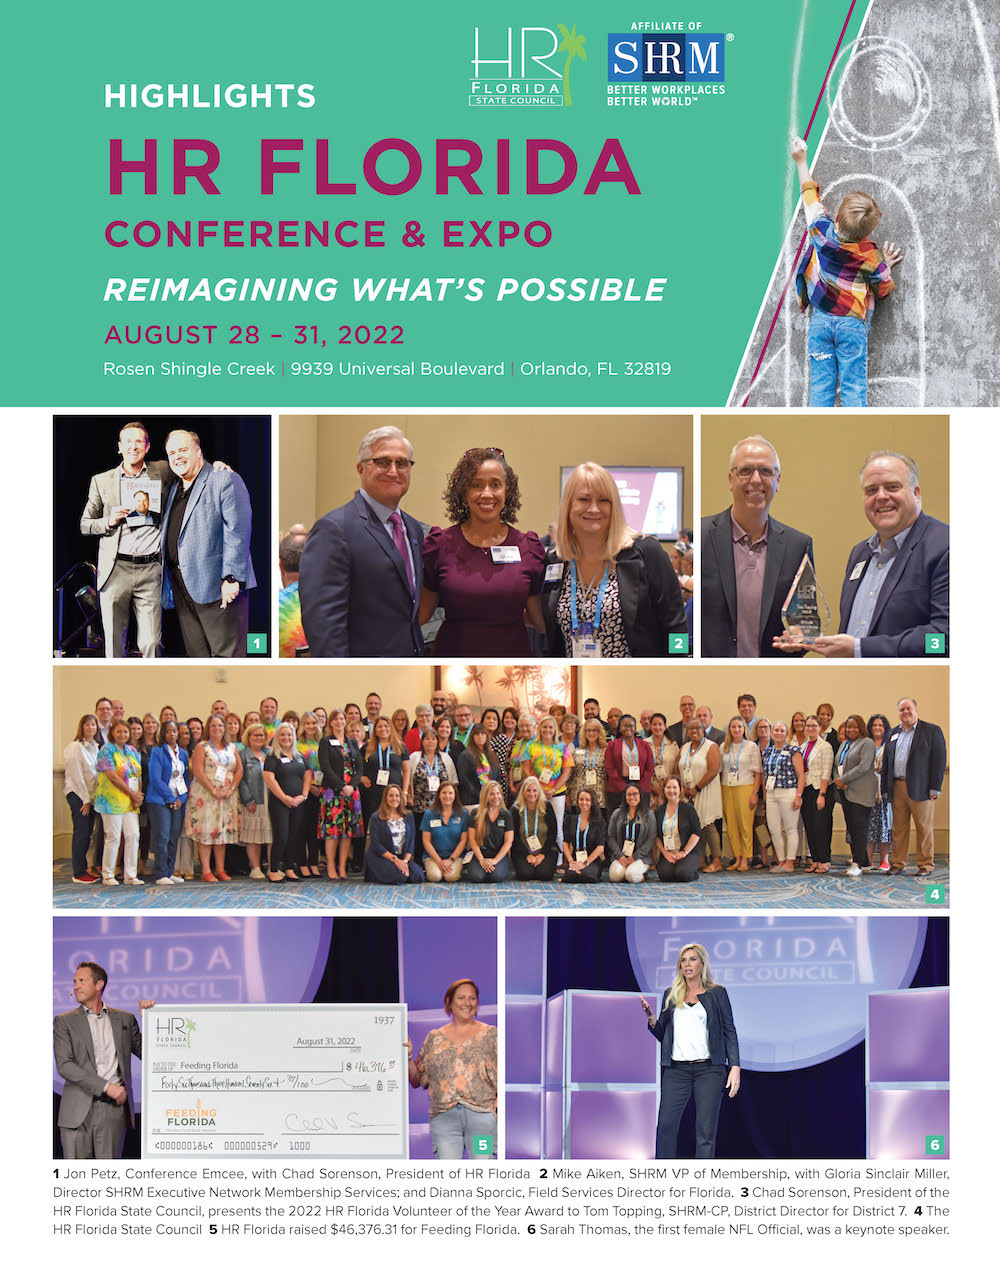 Highlights of the 2022 HR Florida Conference & Expo in Orlando August